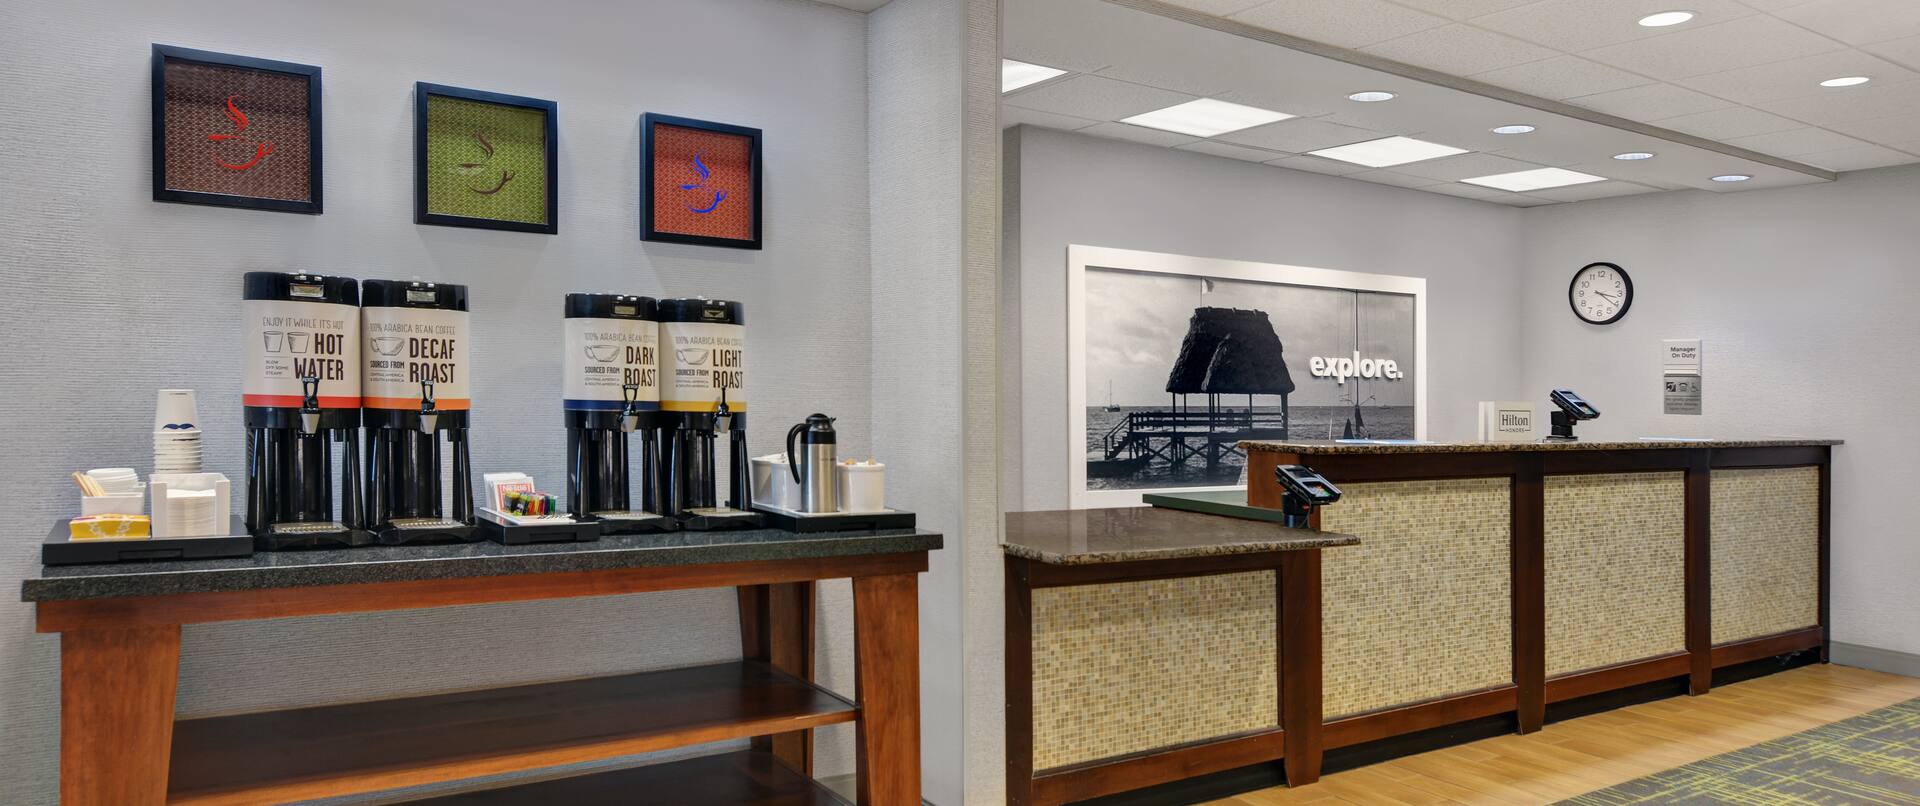 Lobby Front Desk With Coffee Station